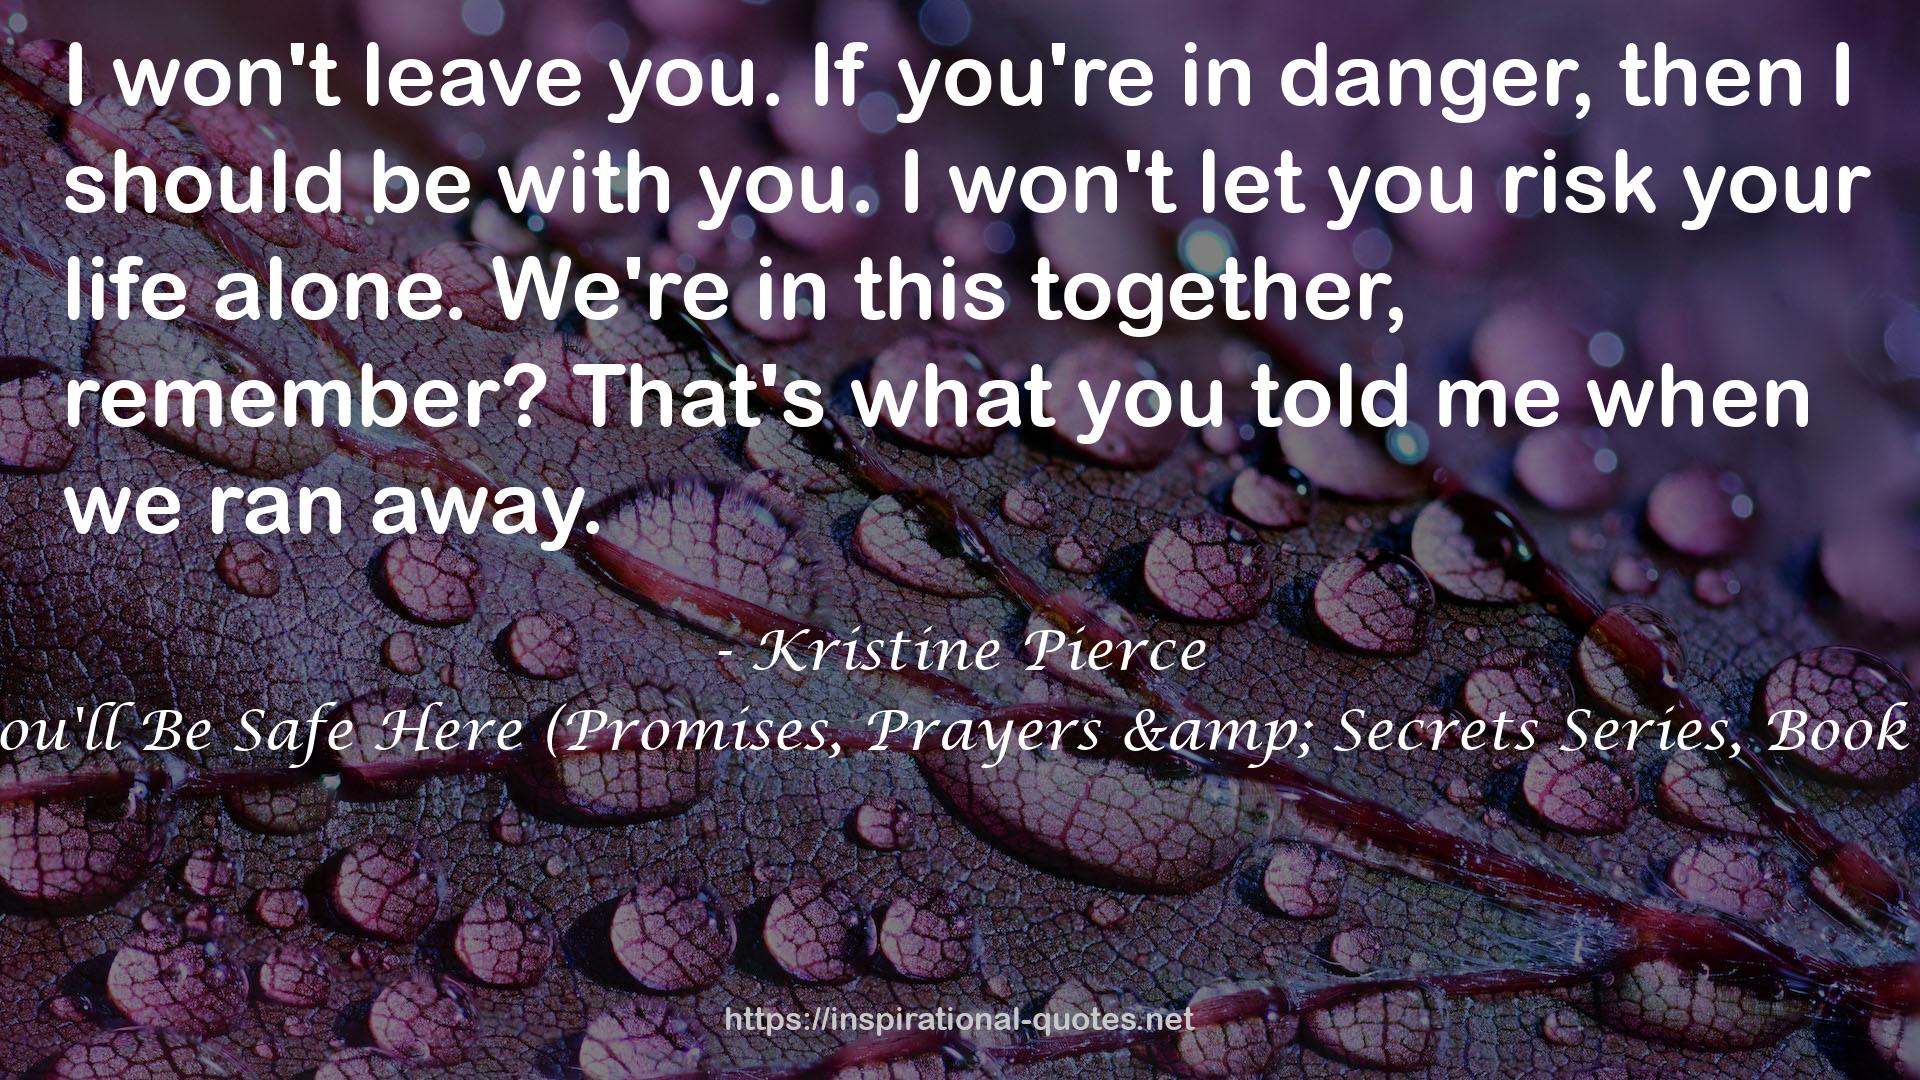 You'll Be Safe Here (Promises, Prayers & Secrets Series, Book 1) QUOTES